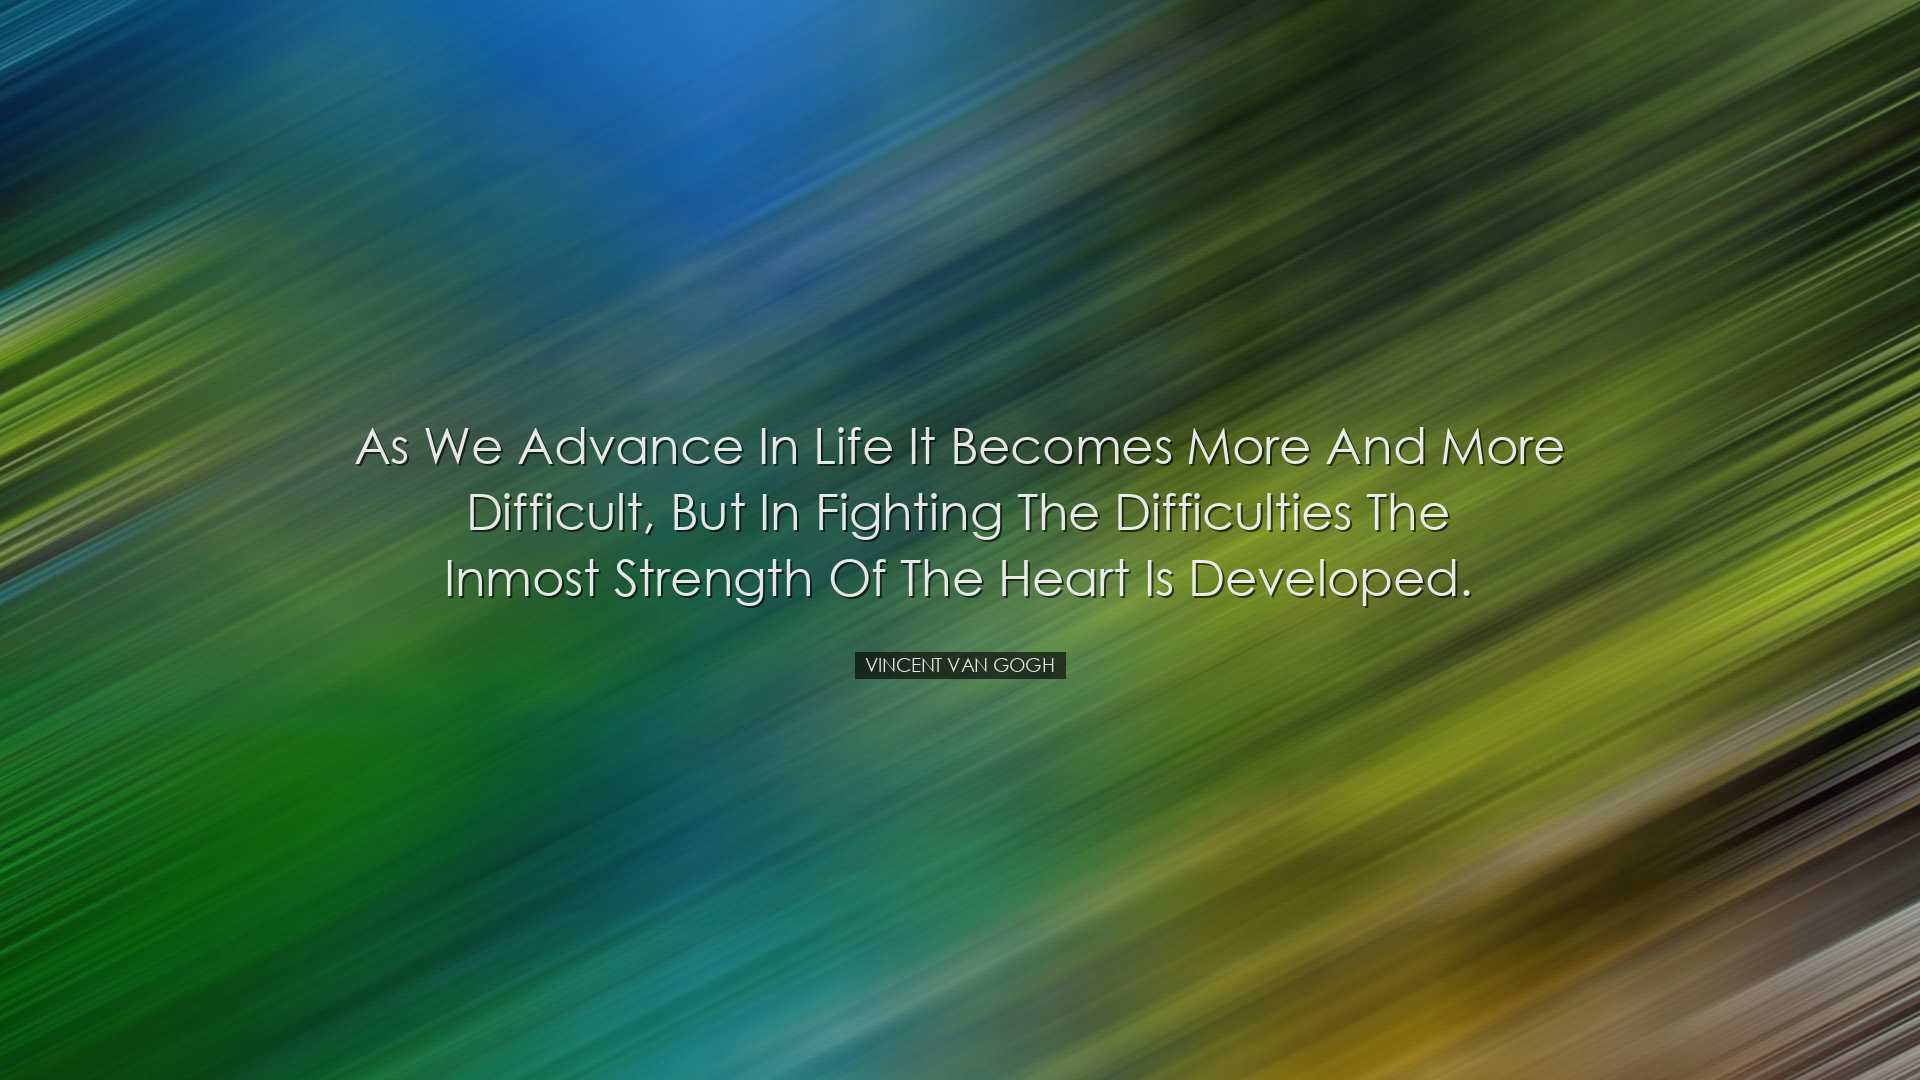 As we advance in life it becomes more and more difficult, but in f